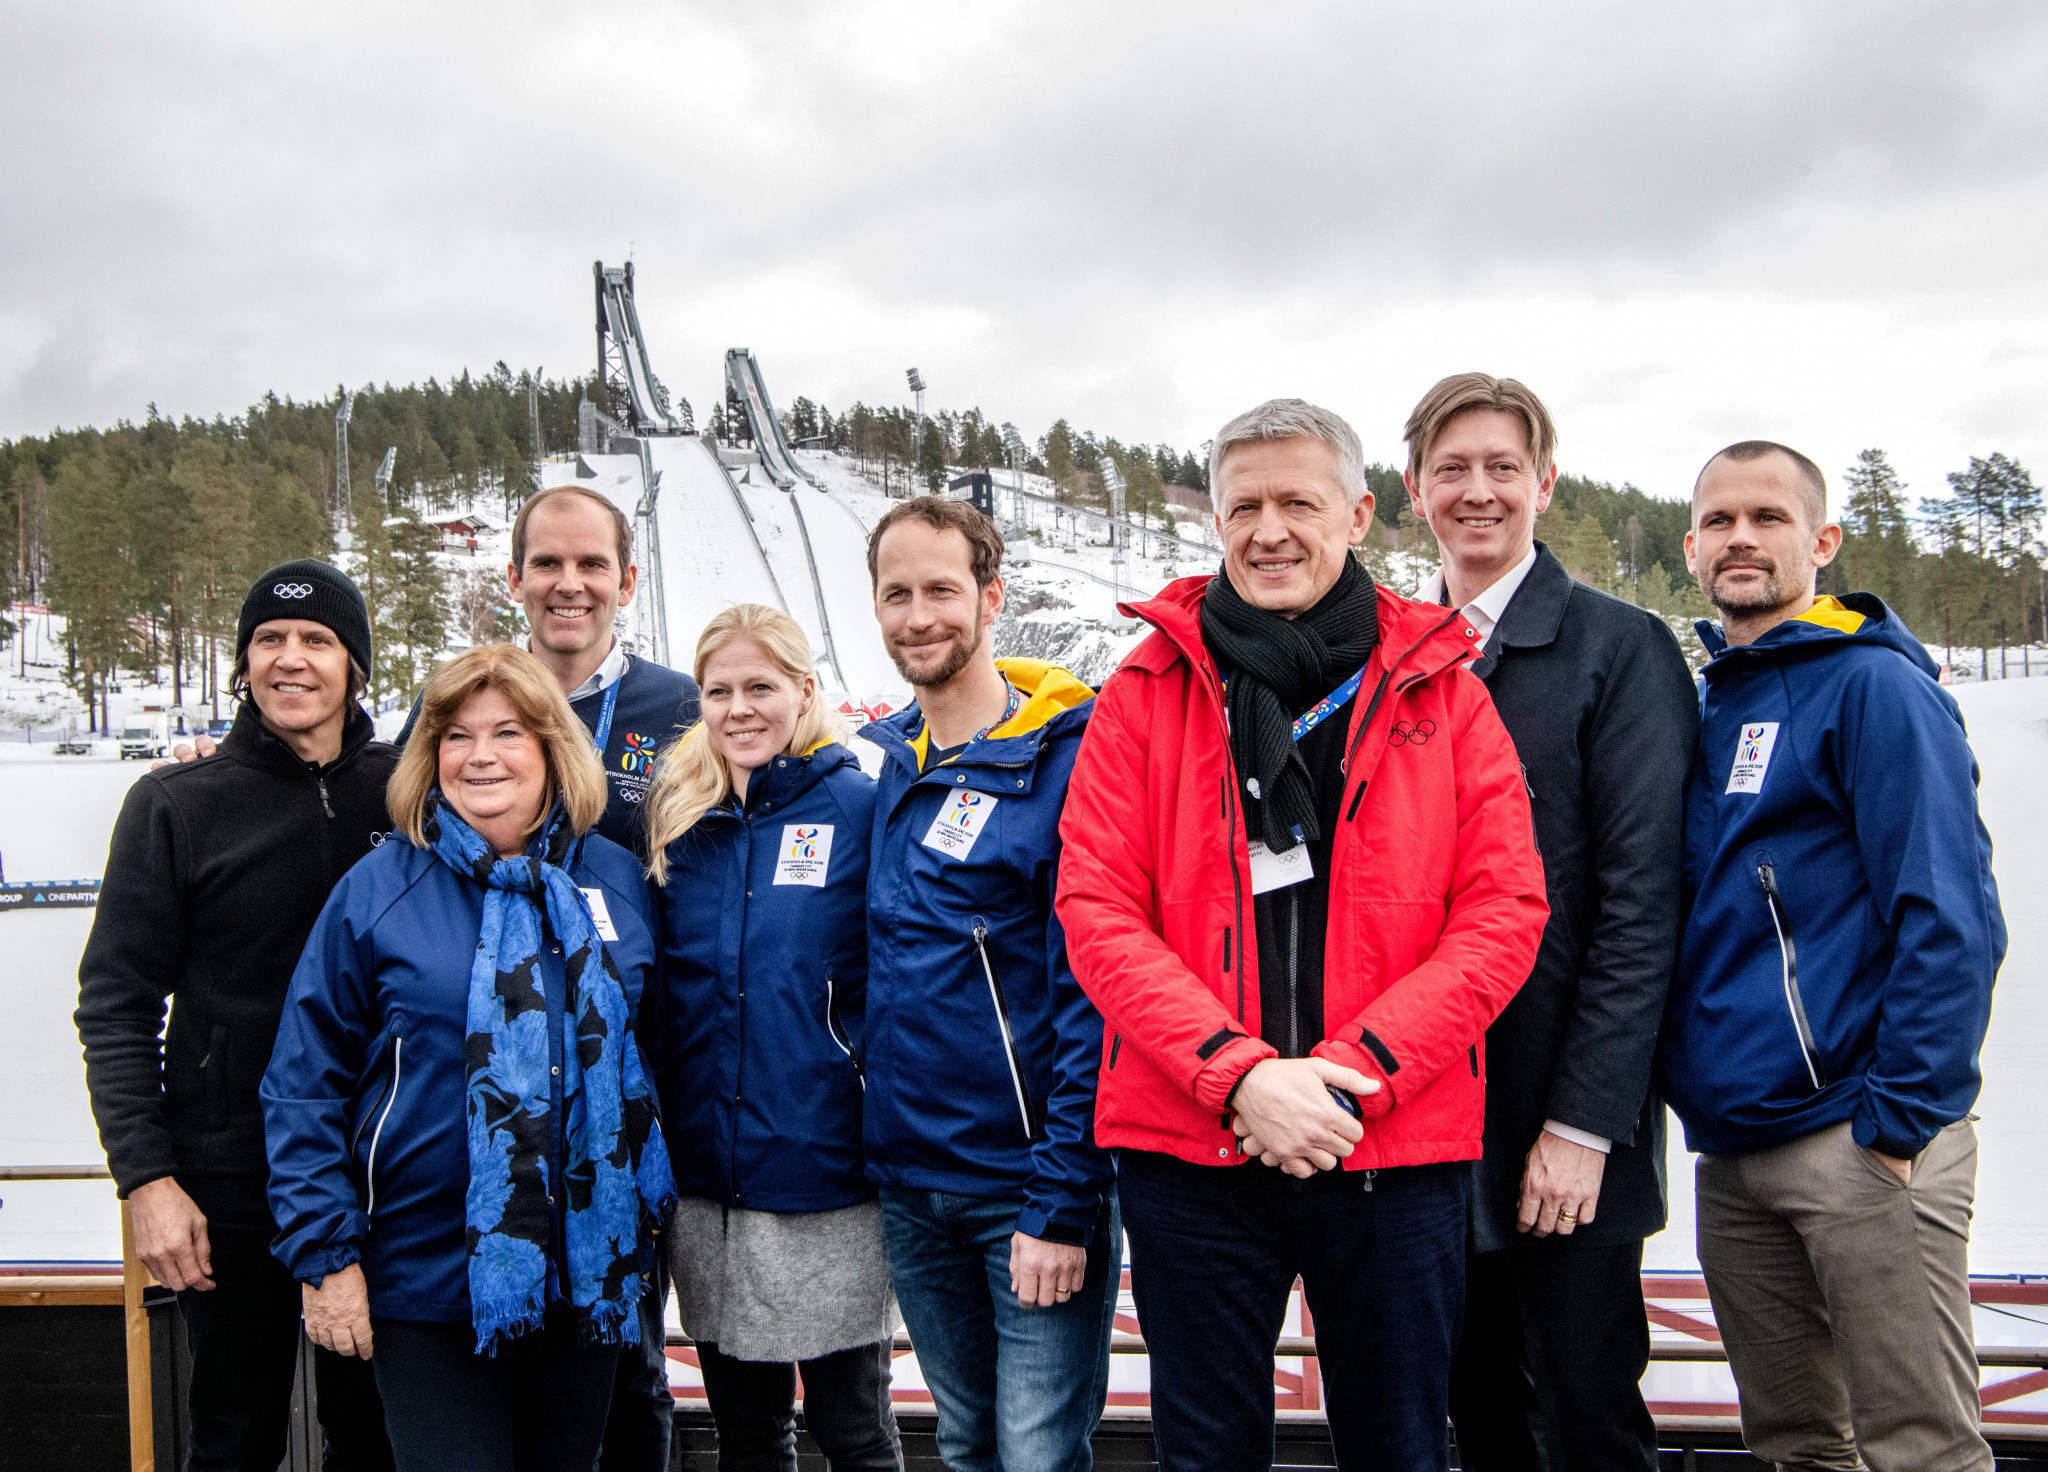 Richard Brisius, second from left at the back, is the chief executive of Stockholm Åre 2026 ©Getty Images